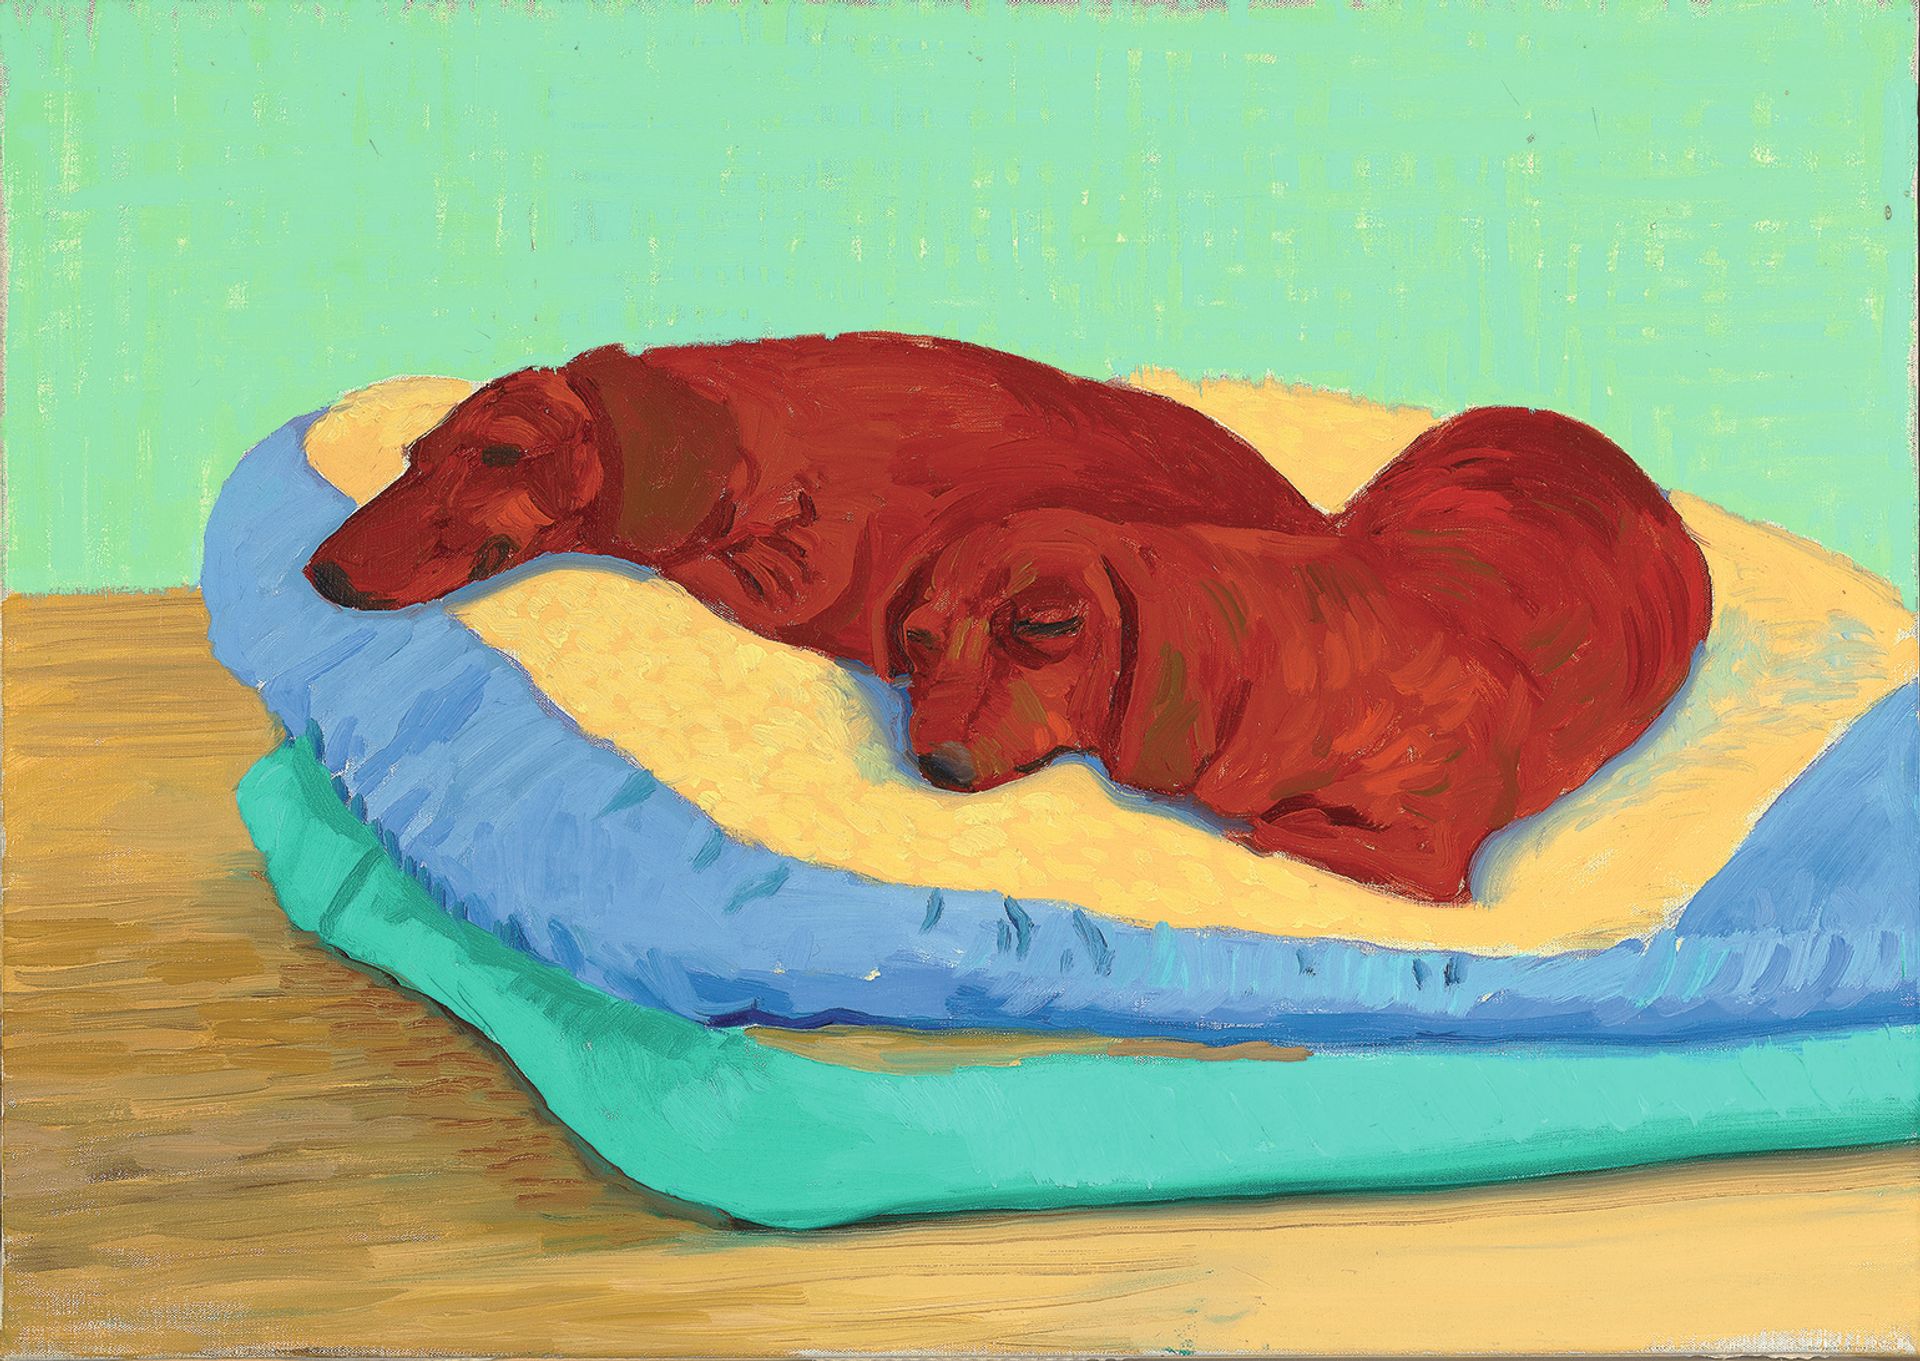 David Hockney’s Dog Painting 19 (1995), one of hundreds the artist created of his beloved dachshunds

Courtesy the artist

